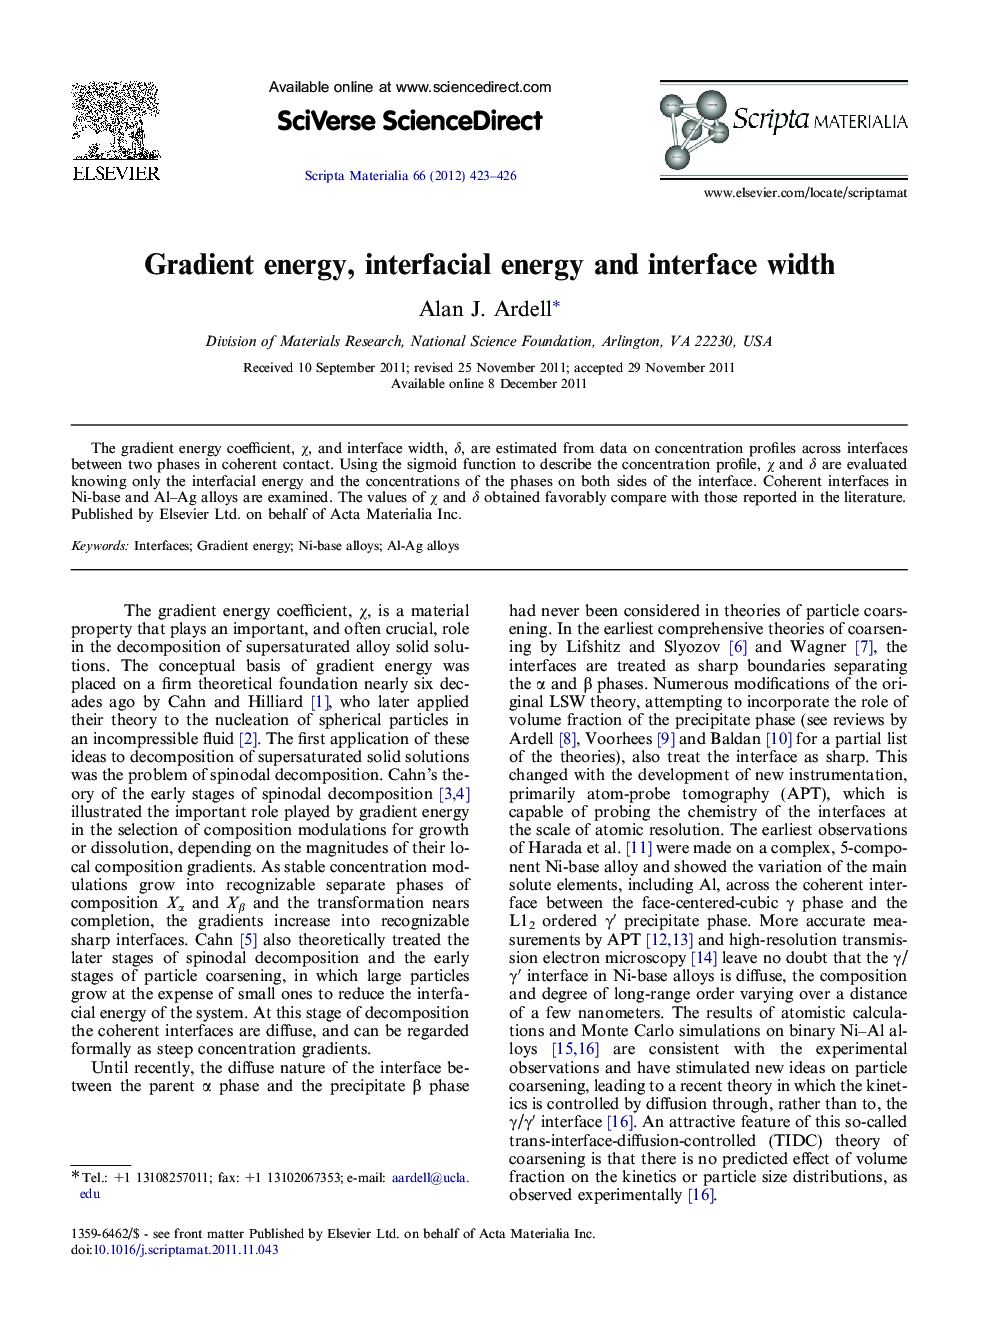 Gradient energy, interfacial energy and interface width